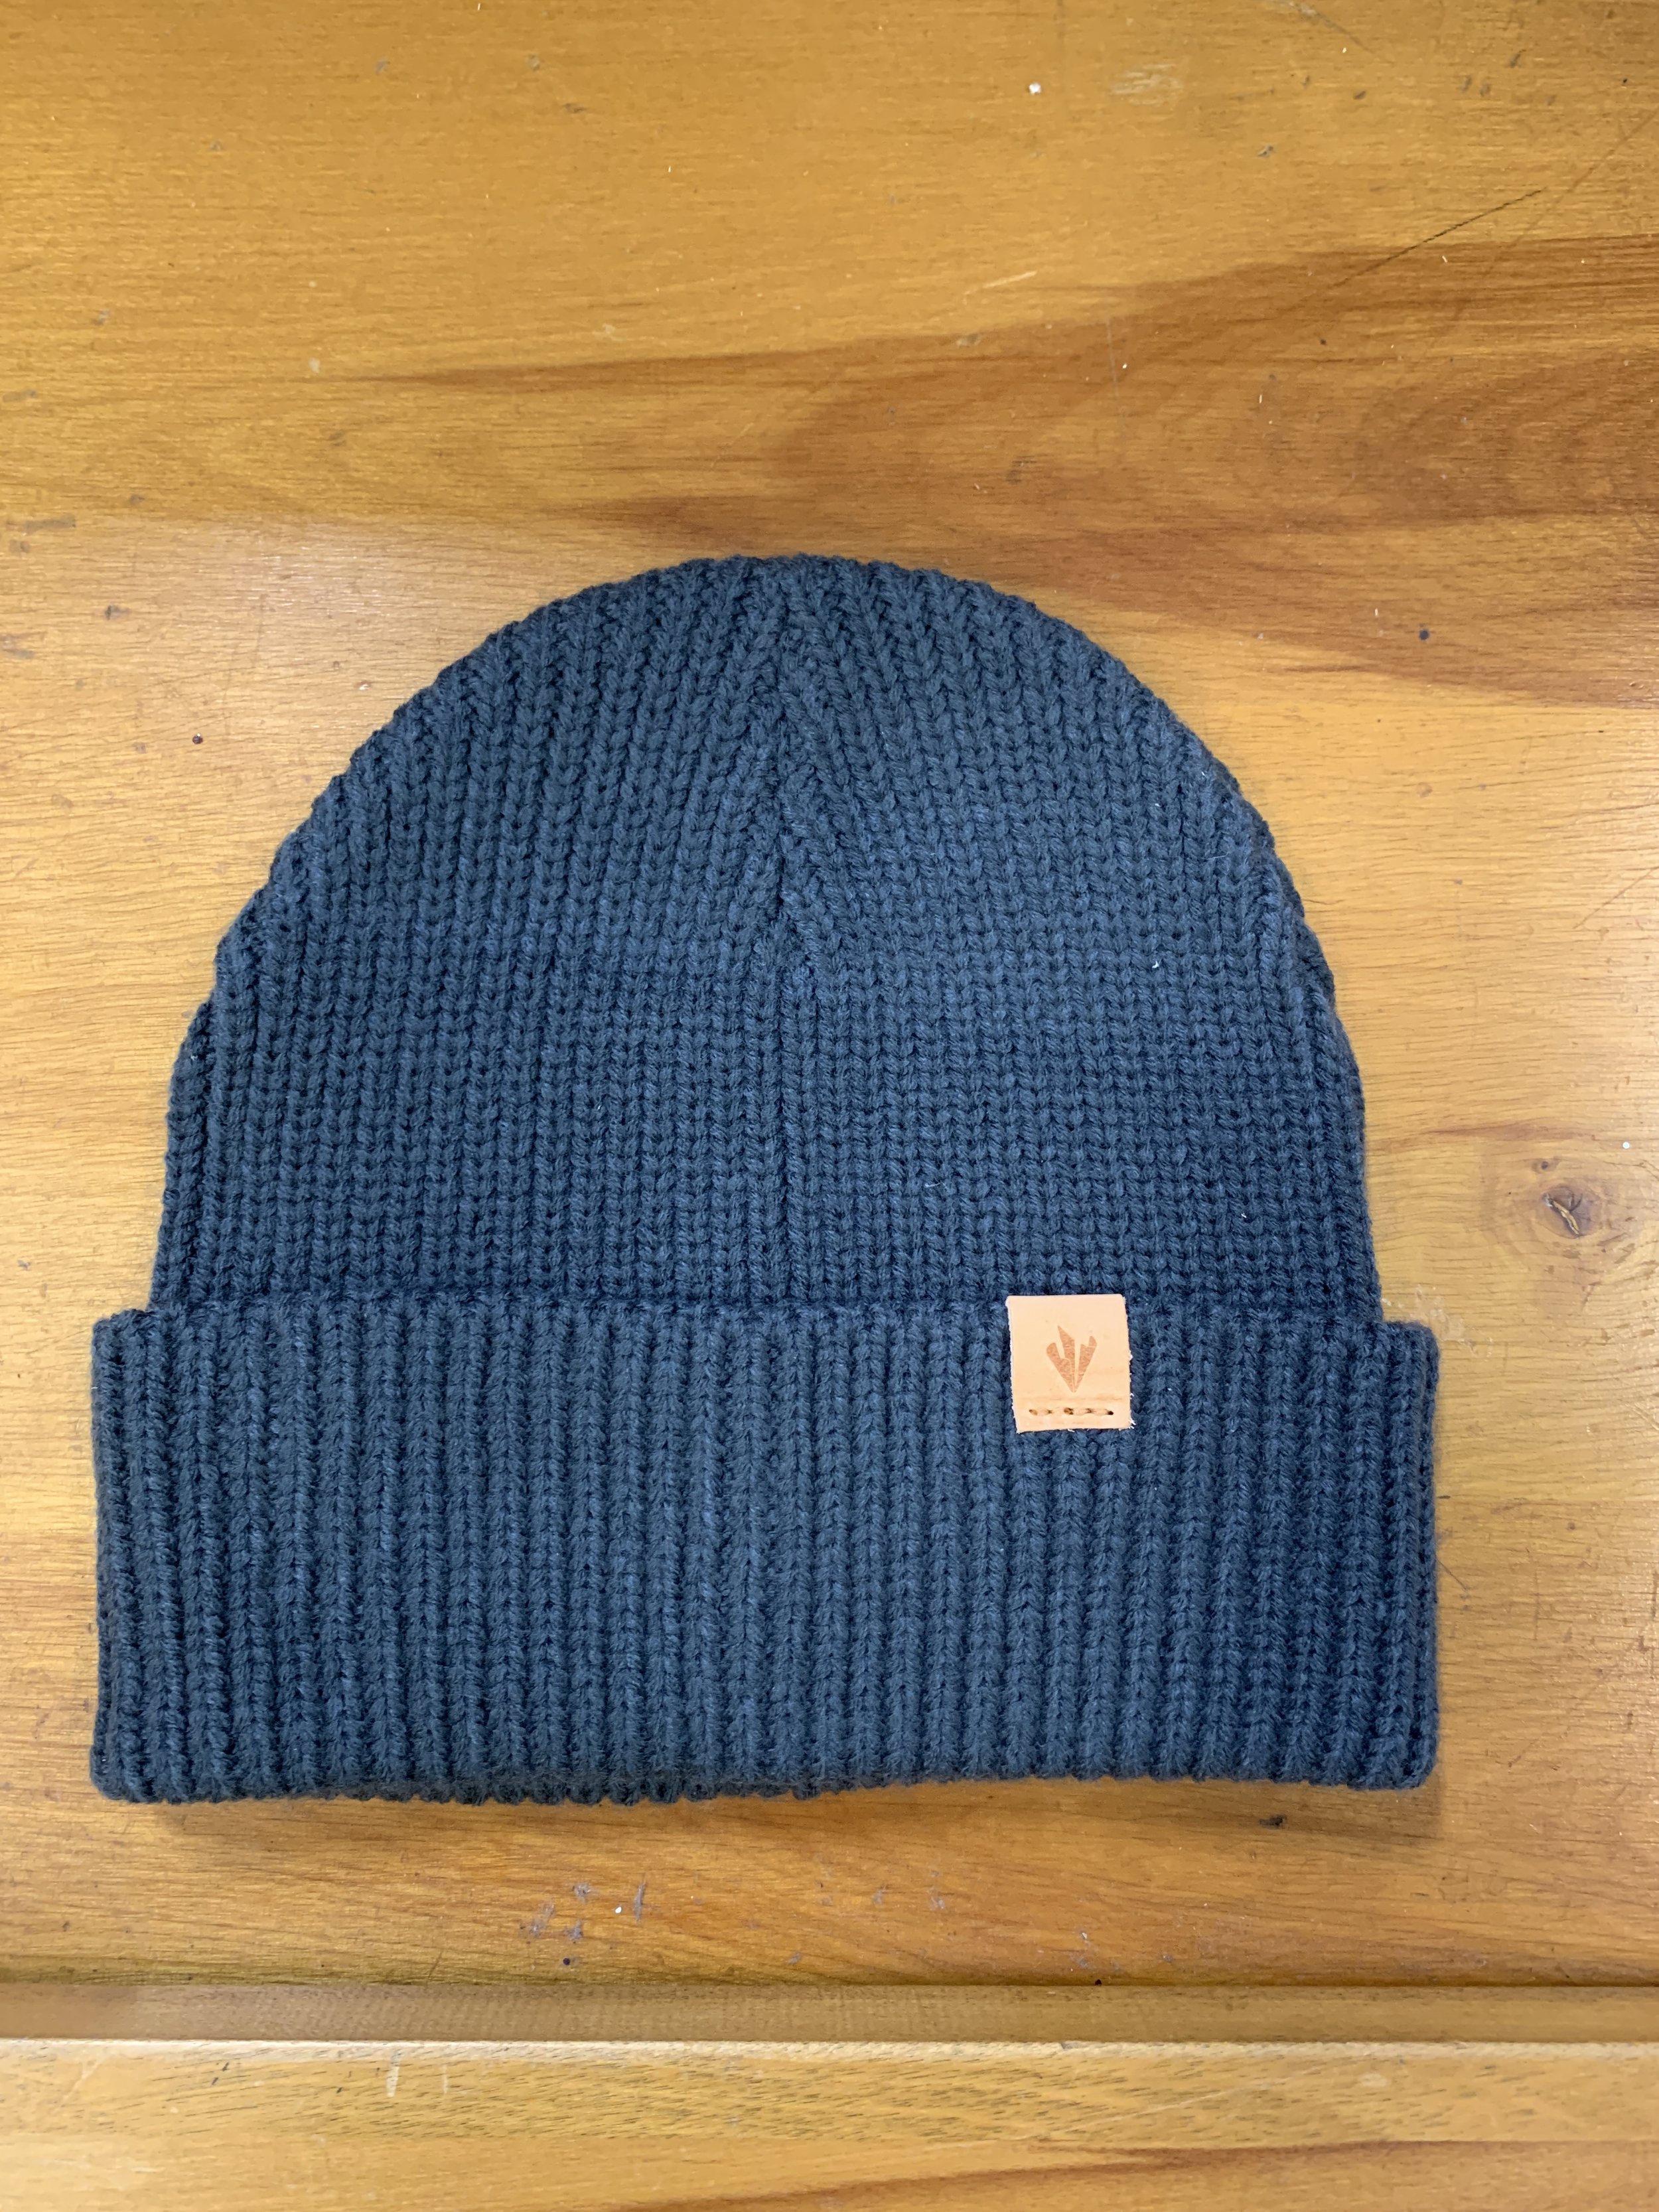 Spooltown-stand-alone-services-portland-warehouse-sewing-factory-knit-hat-label-beanie.JPG